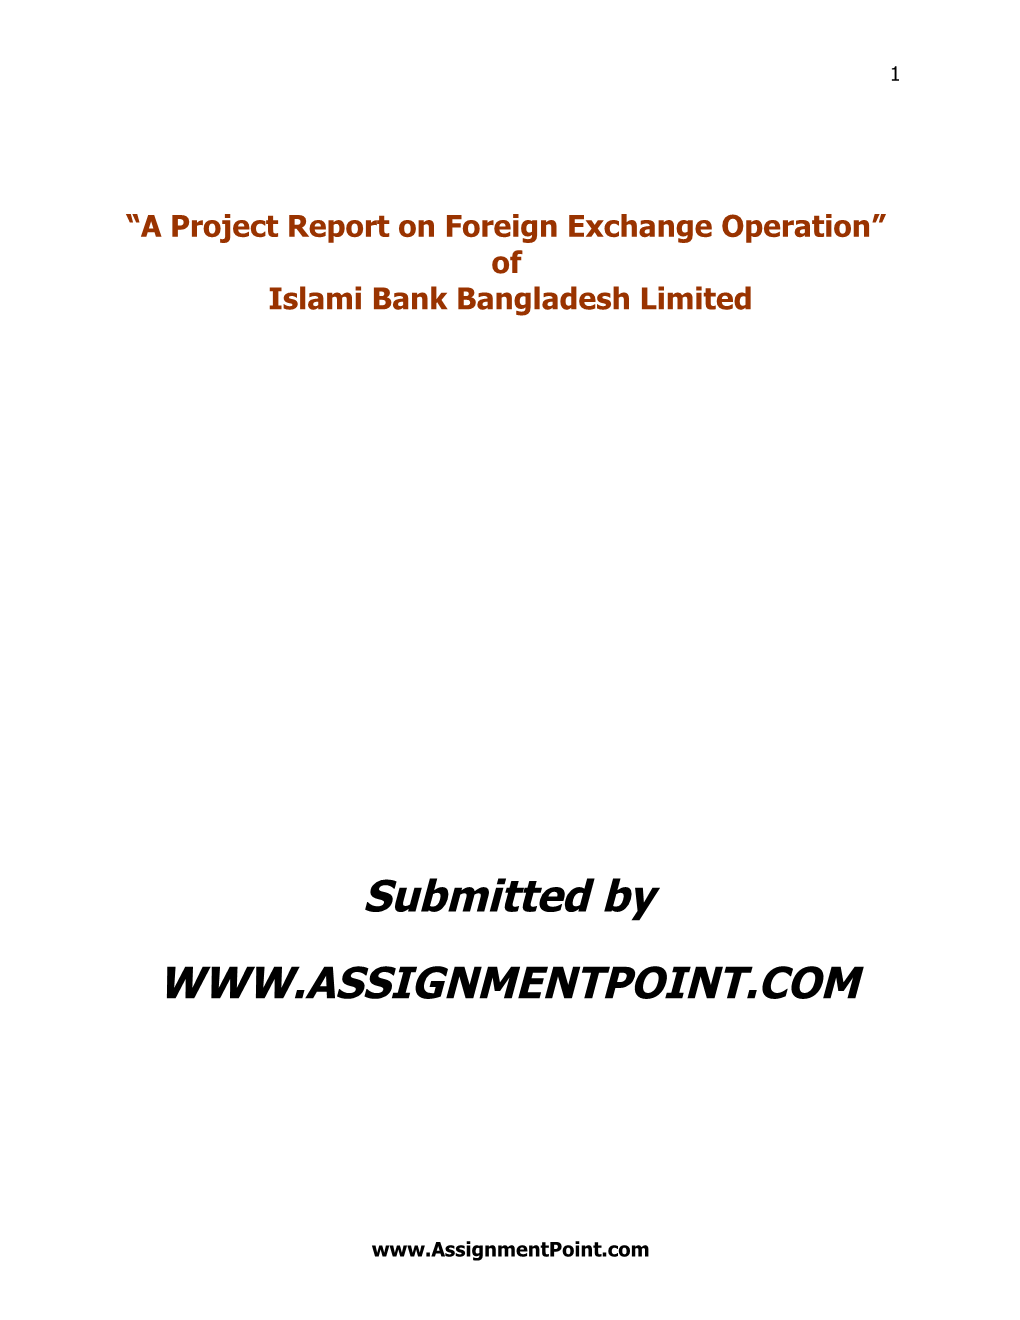 A Project Report on Foreign Exchange Operation